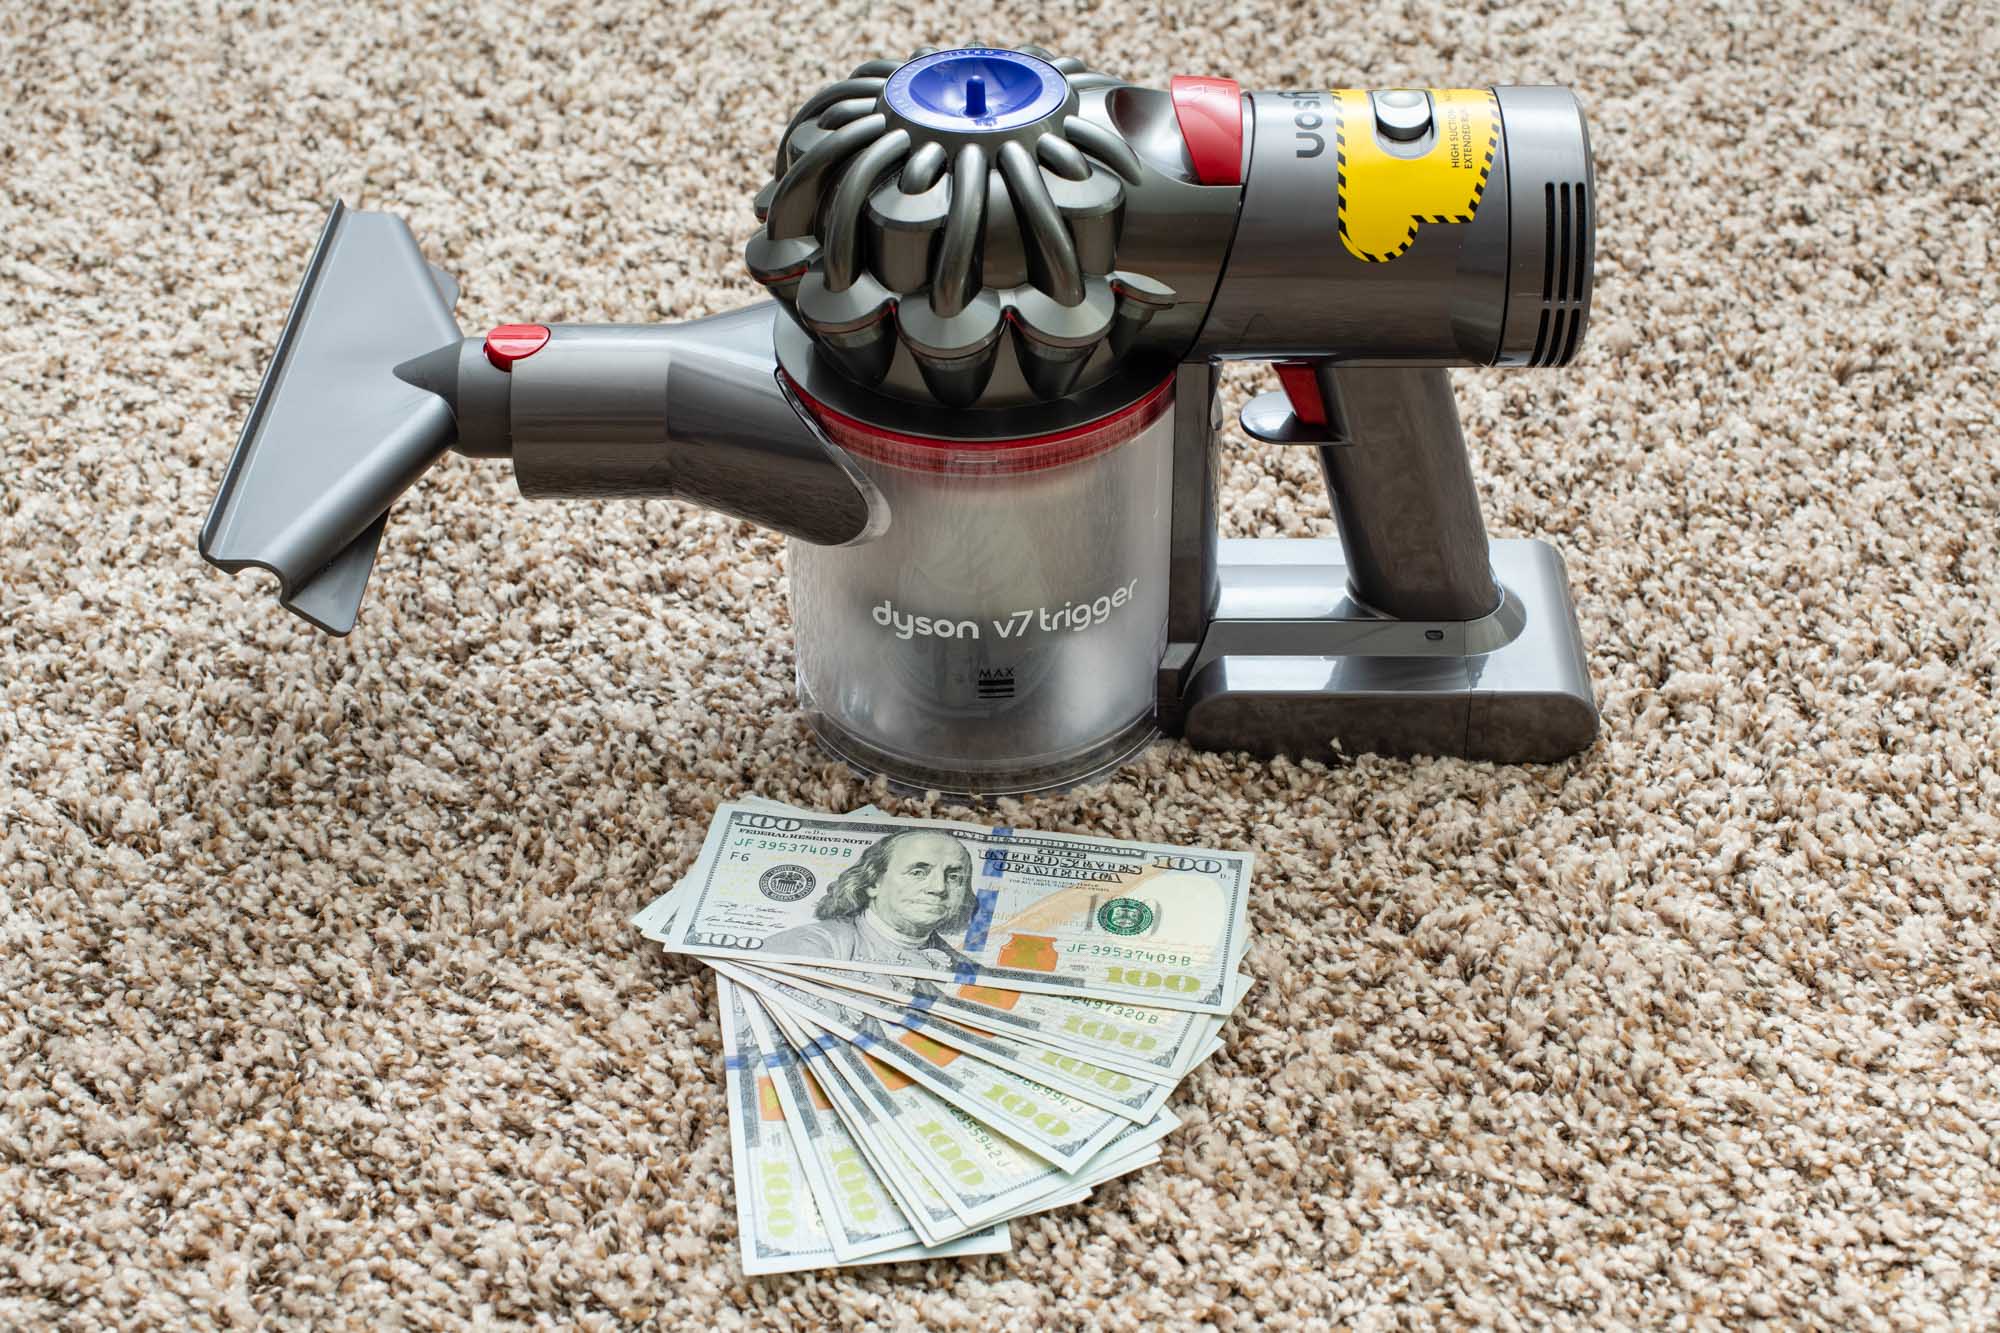 the pricey Dyson V7 next to a pile of cash